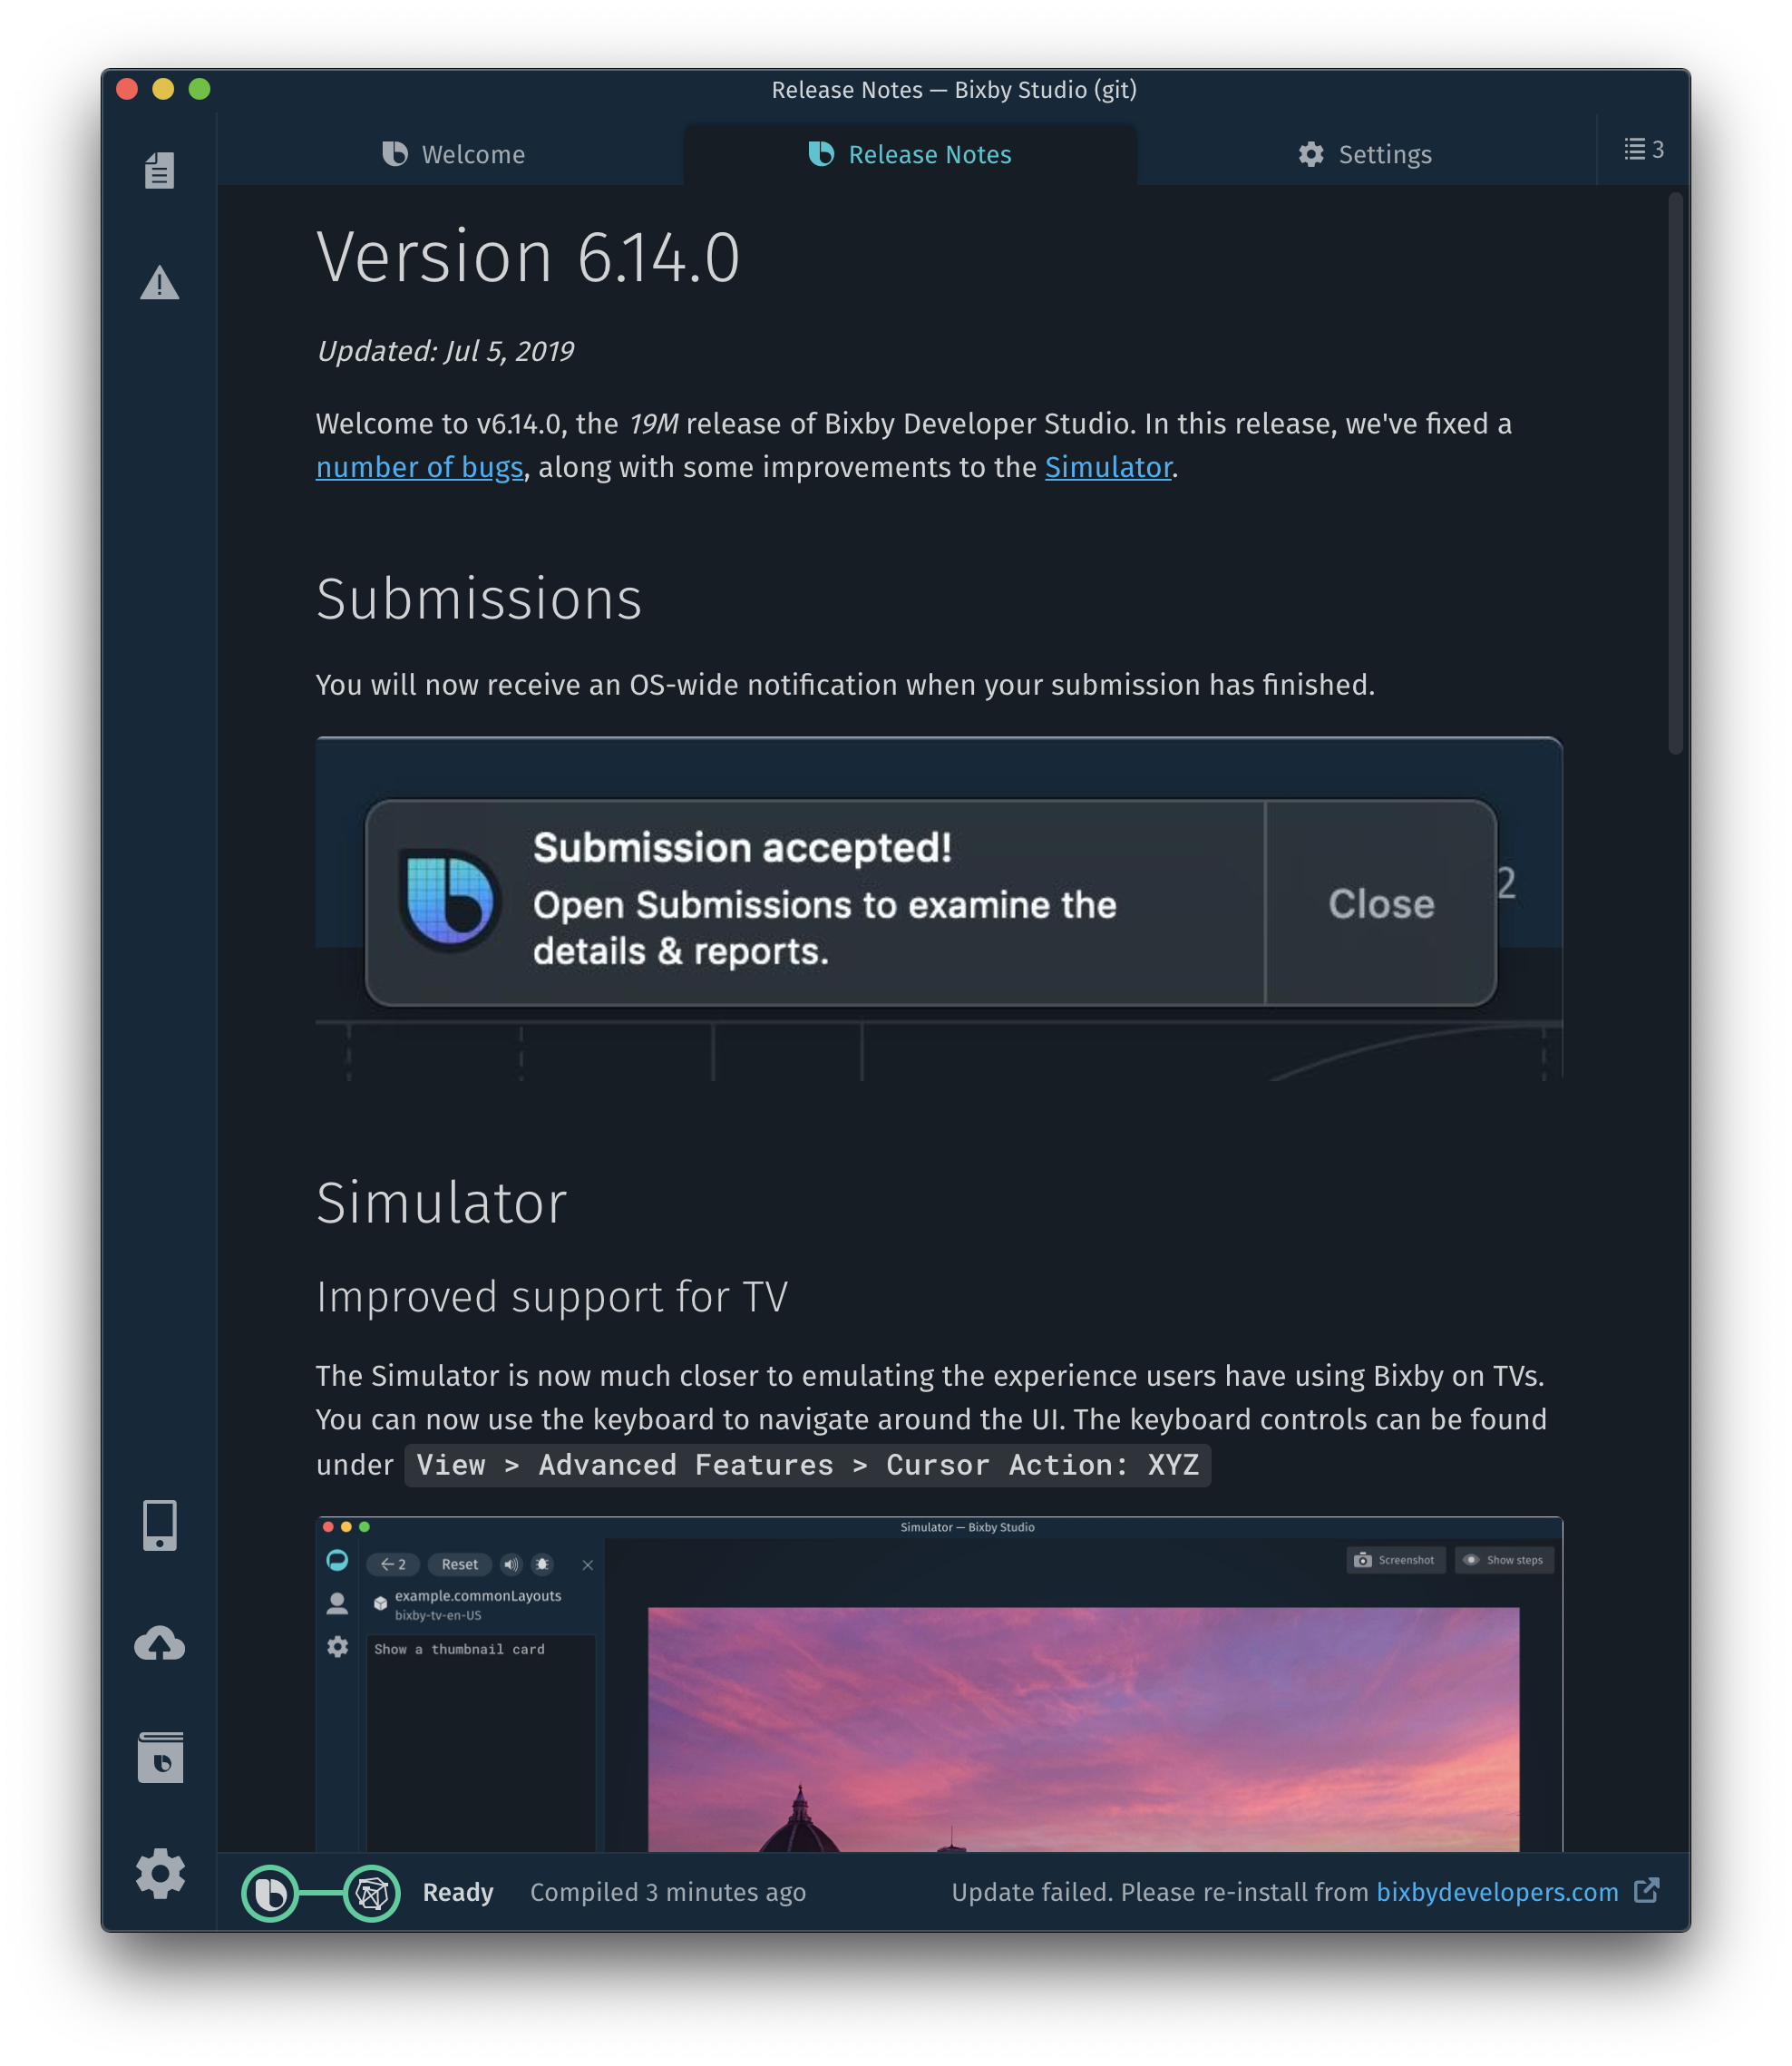 Release notes tab